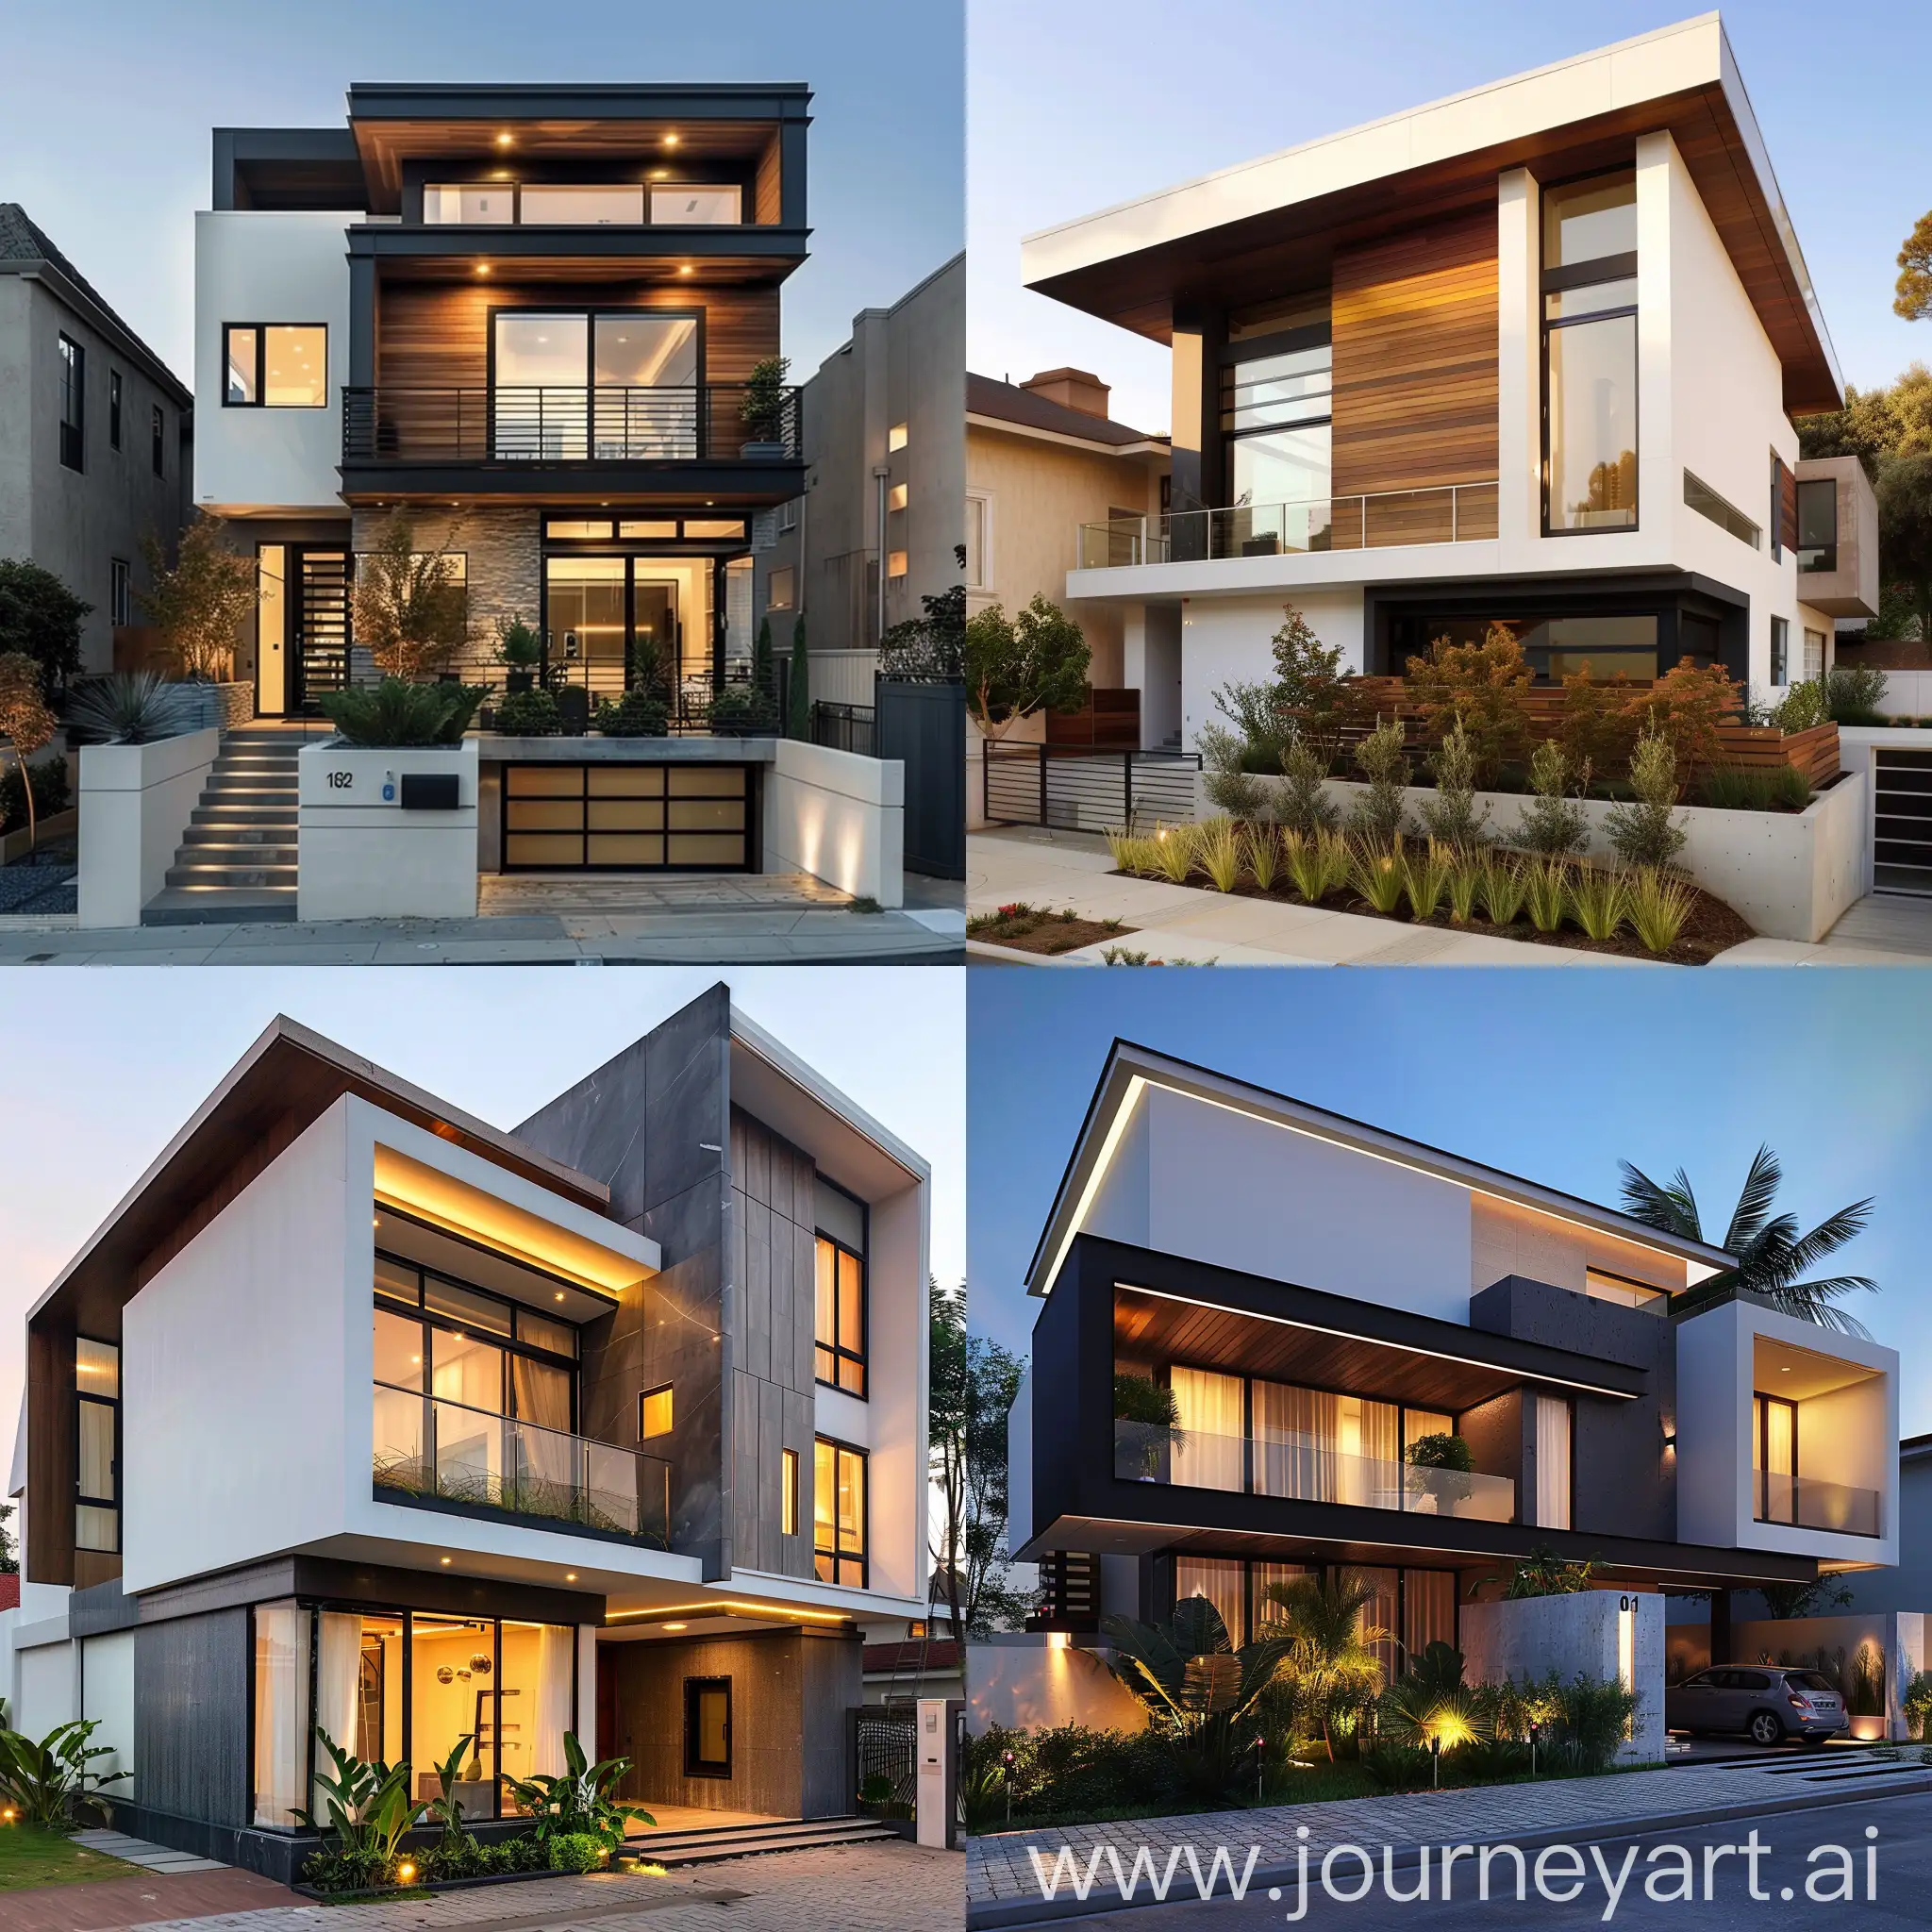 Contemporary-Exterior-House-Design-with-Clean-Lines-and-Neutral-Tones